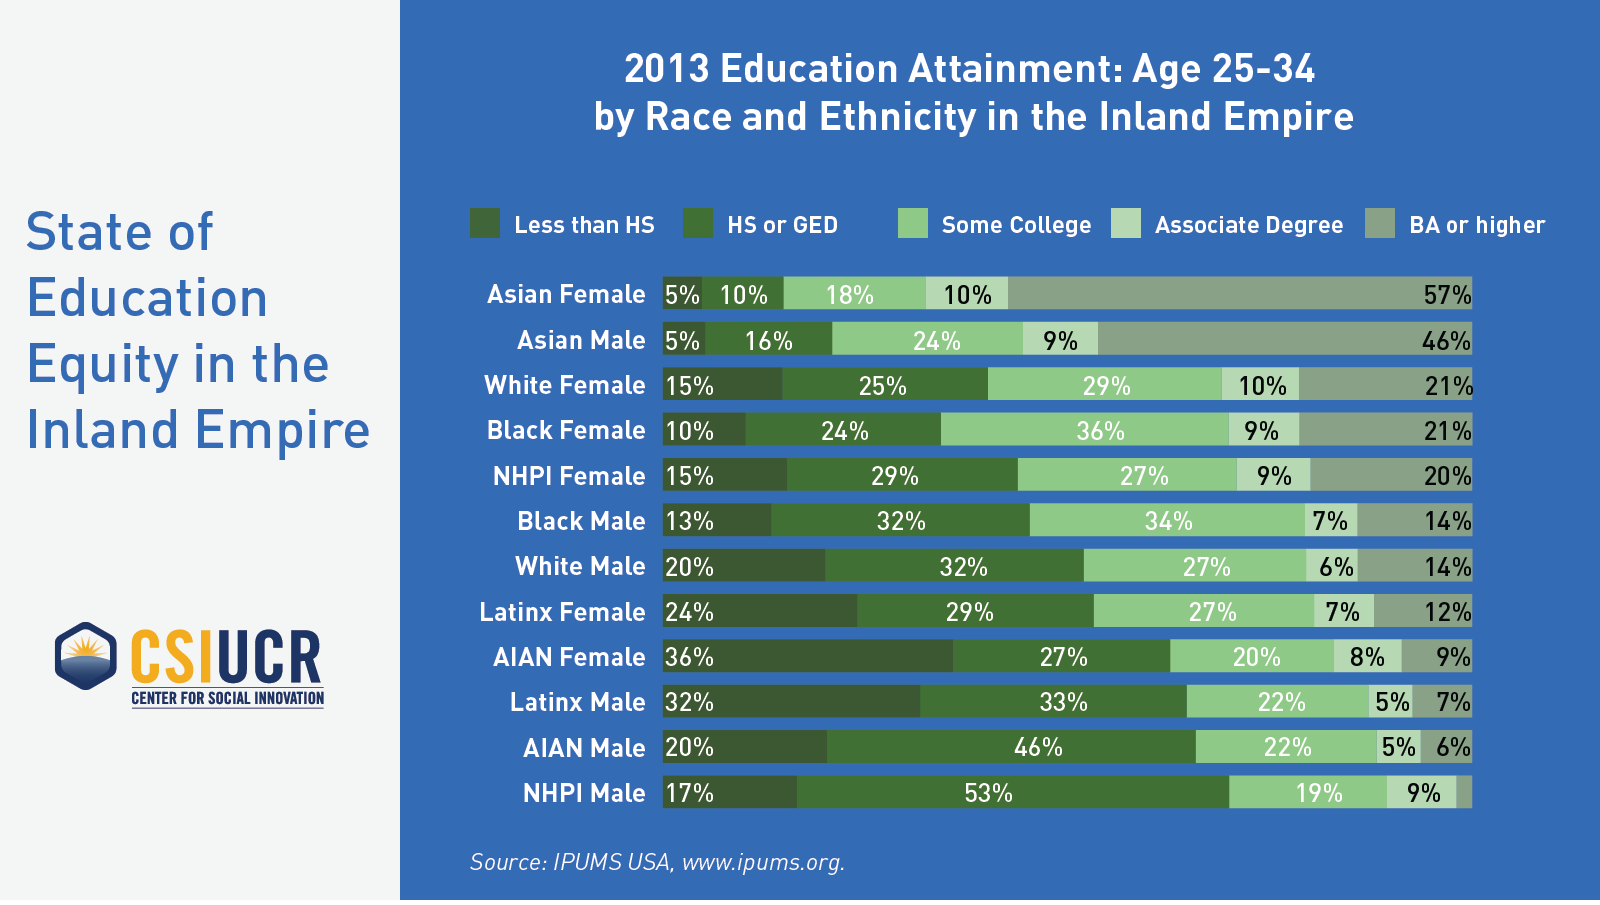 2013 Education Attainment: 25-34 by Race and Ethnicity in the Inland Empire